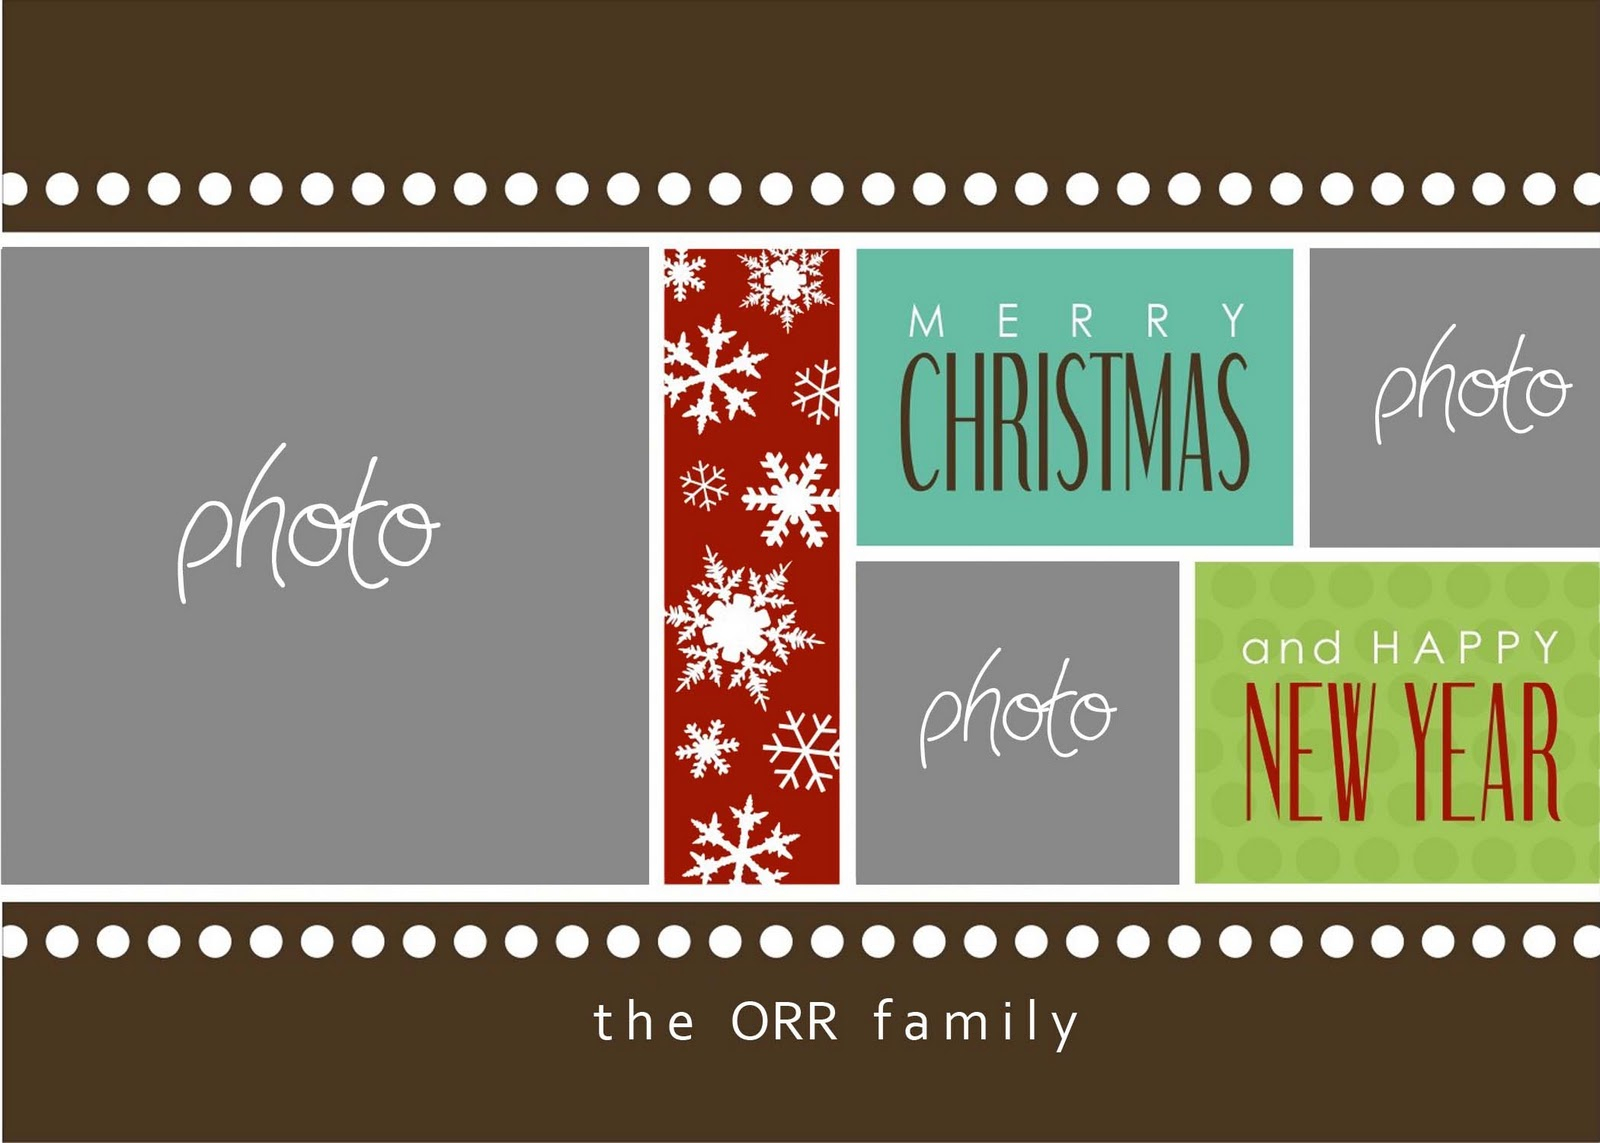 8 Free Photoshop Christmas Card Templates Images - Photoshop Within Christmas Photo Card Templates Photoshop